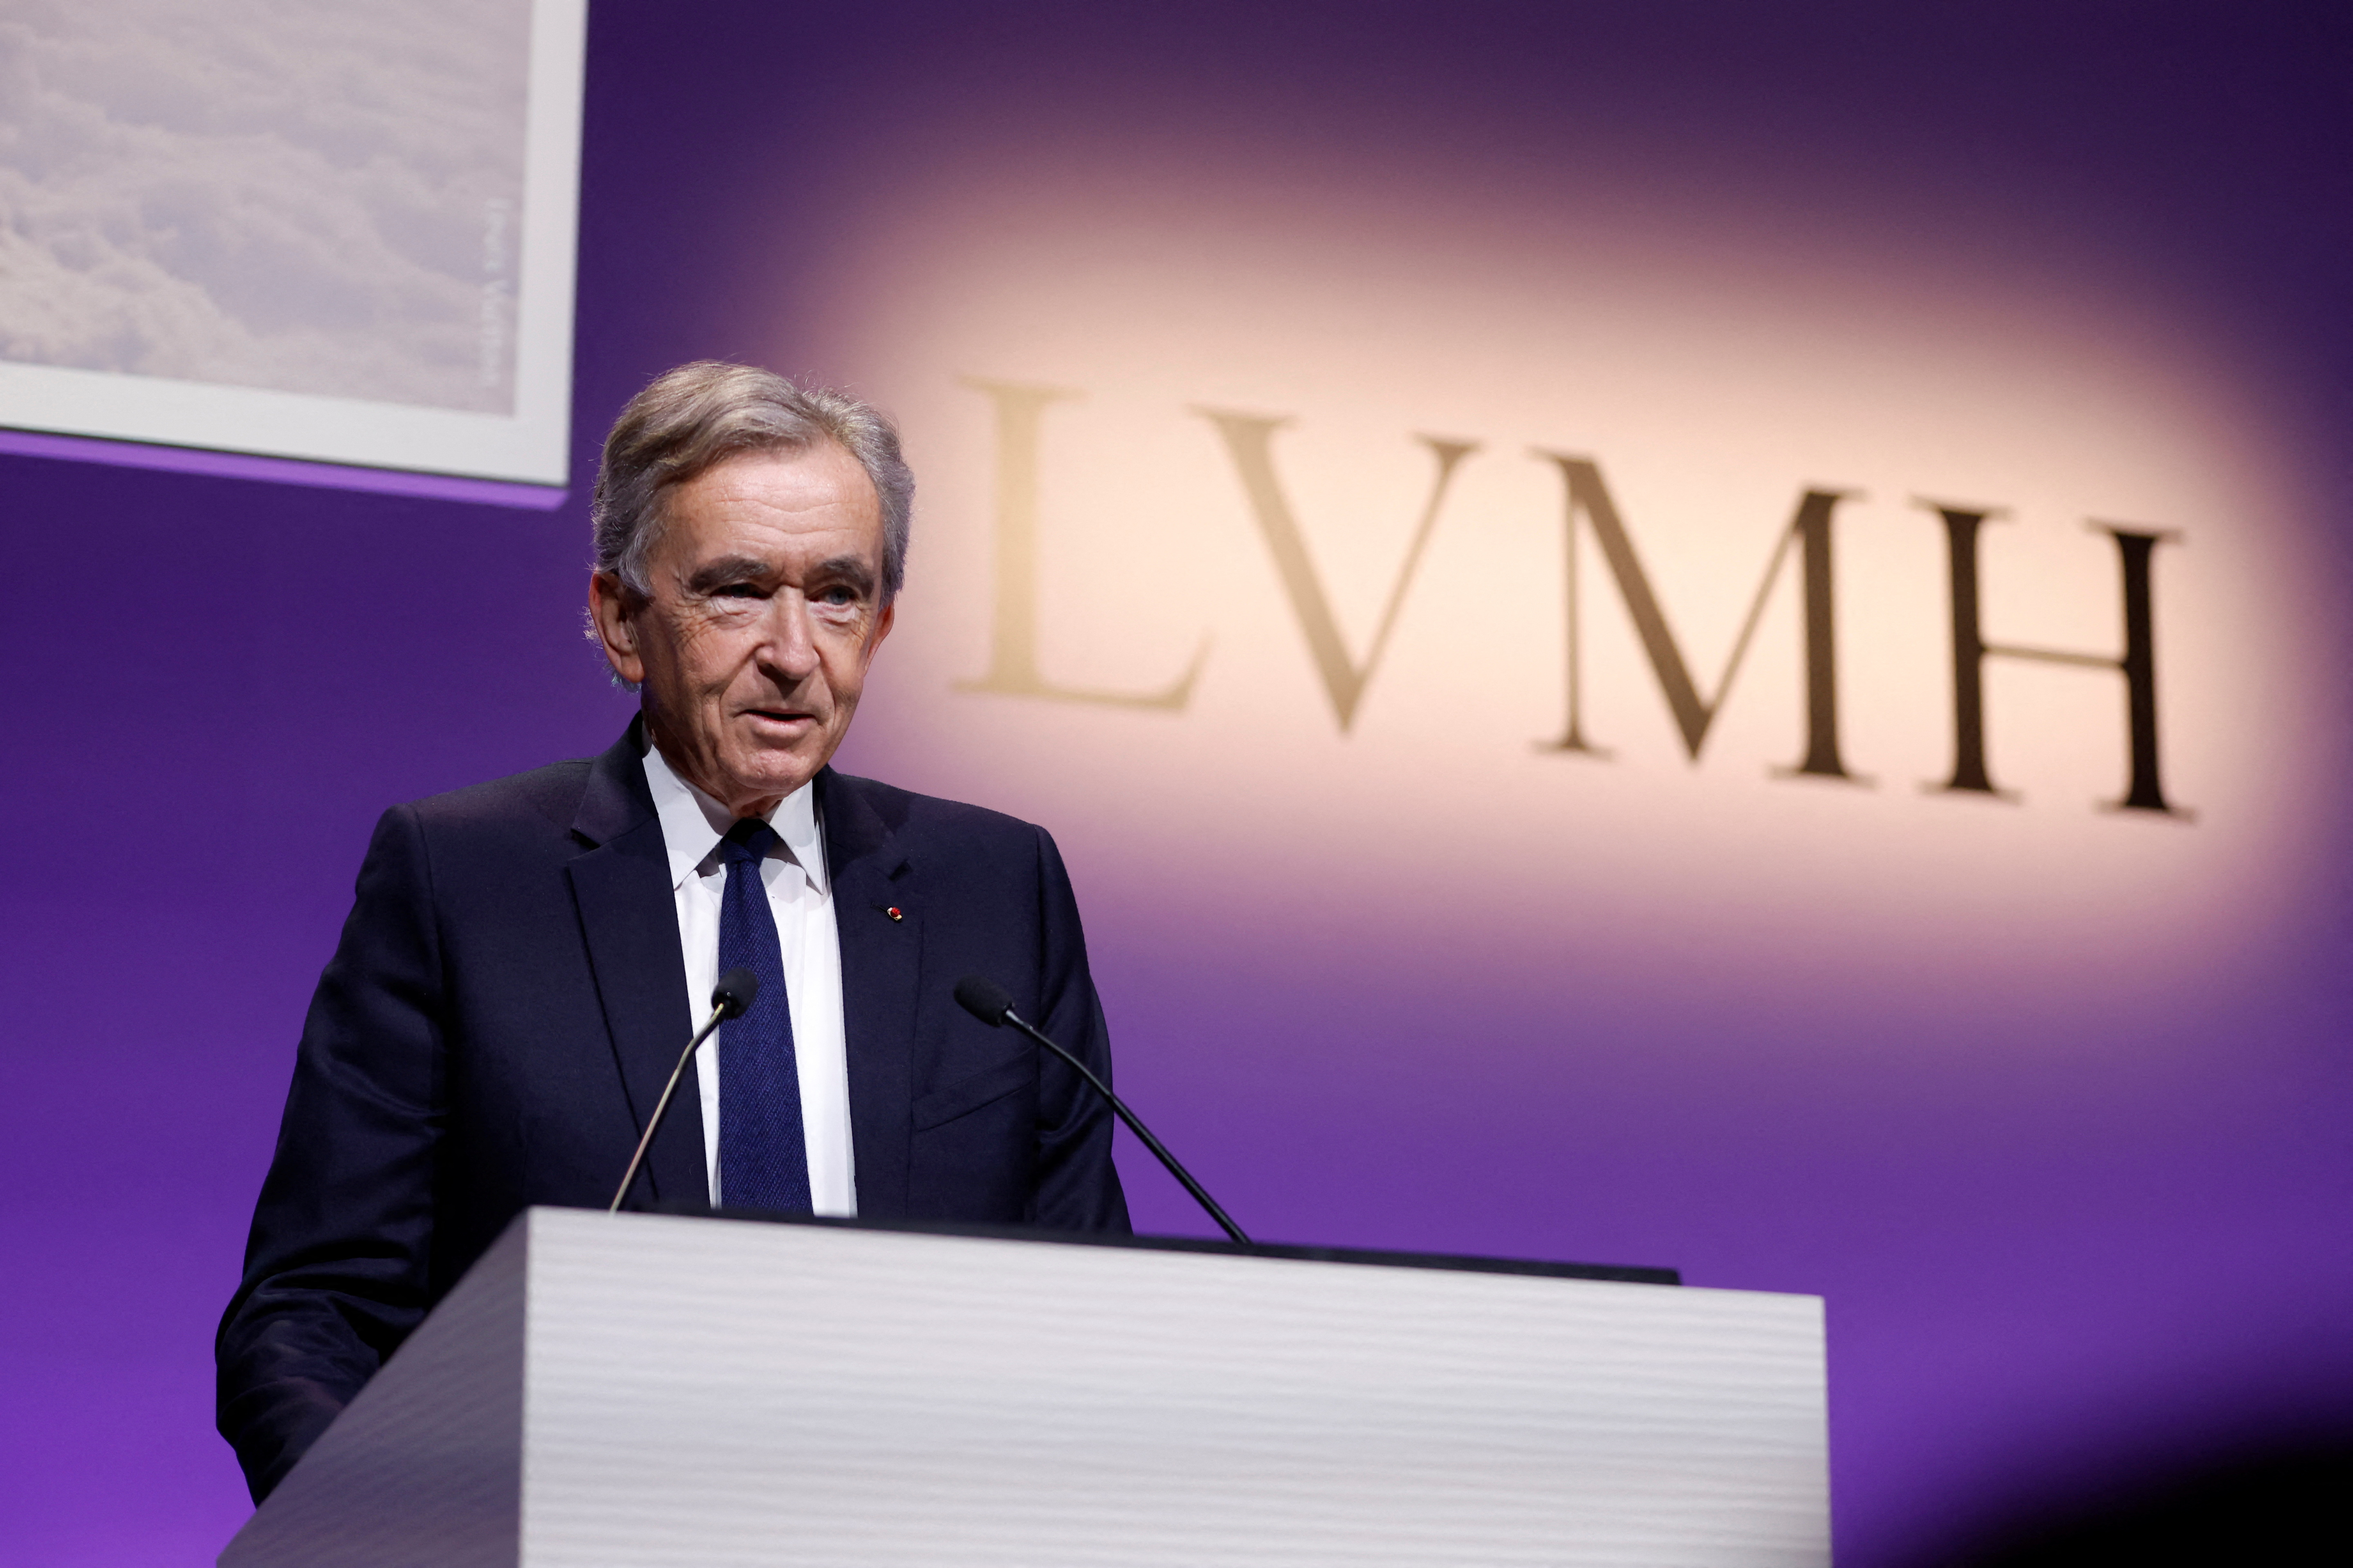 LVMH's smooth ride faces twin speed bumps